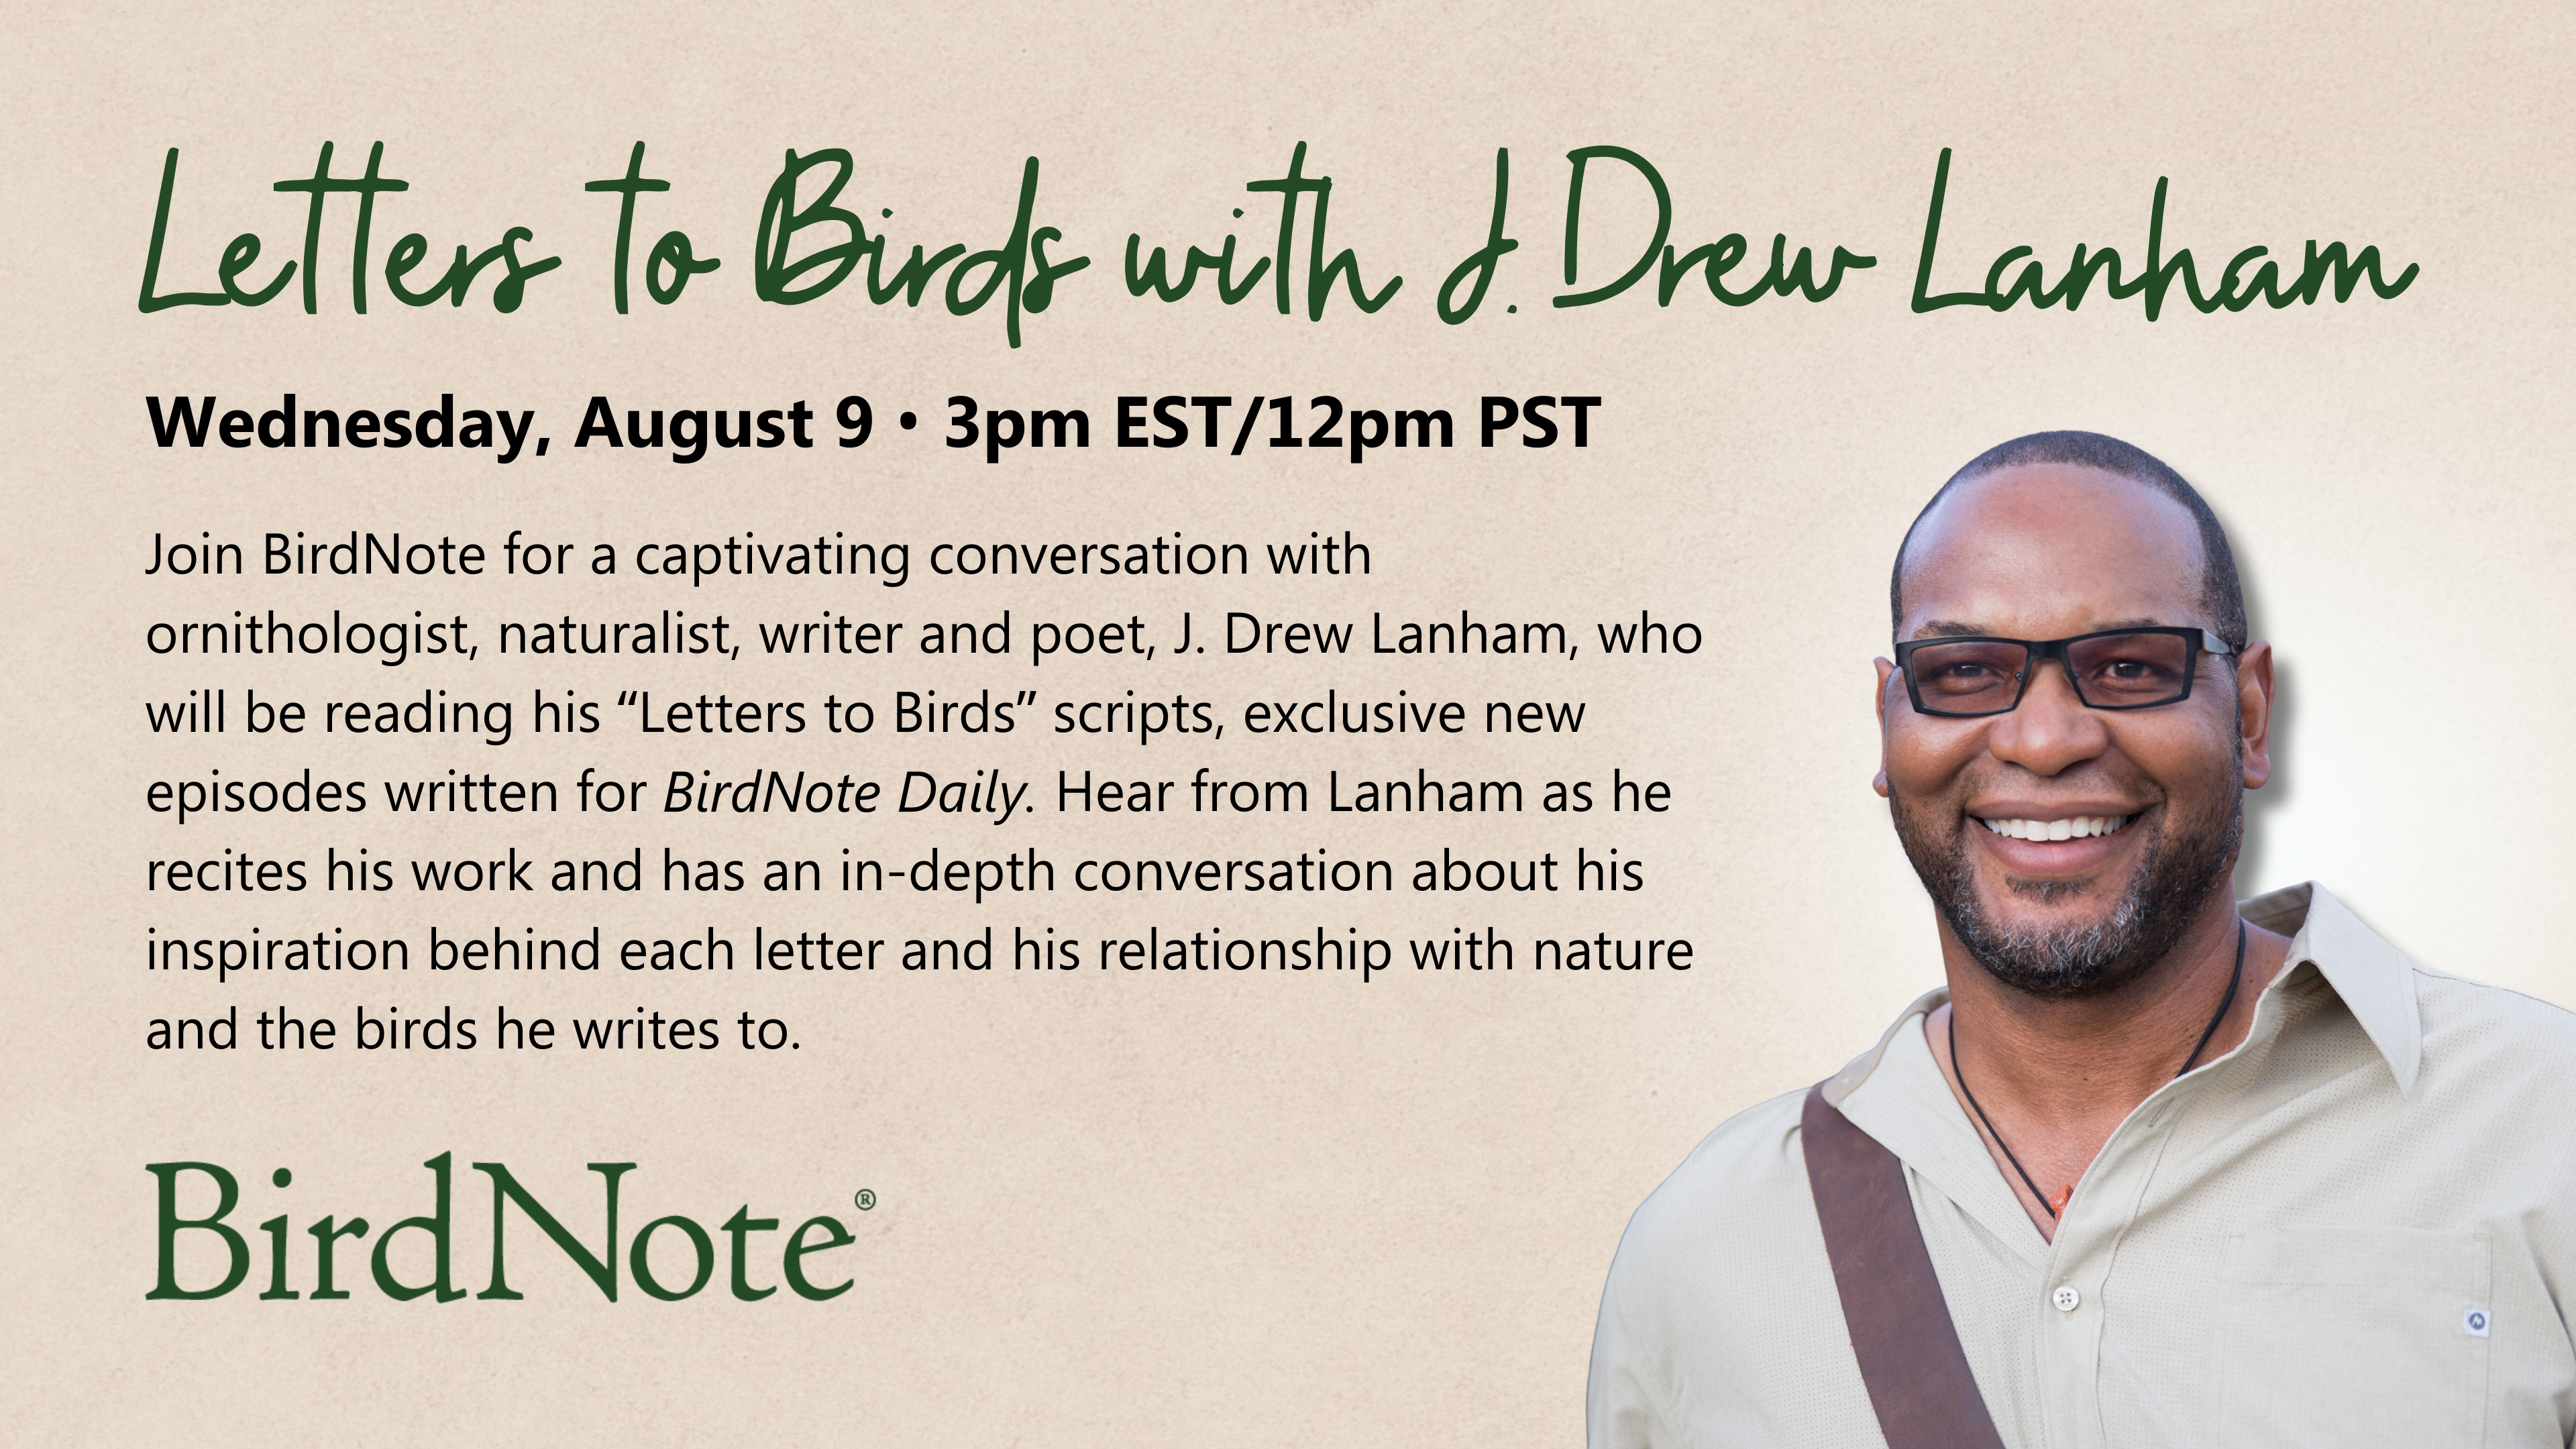 A graphic describing BirdNote's Letters to Birds Event on August 9th at 3pm EST/12pm PST.